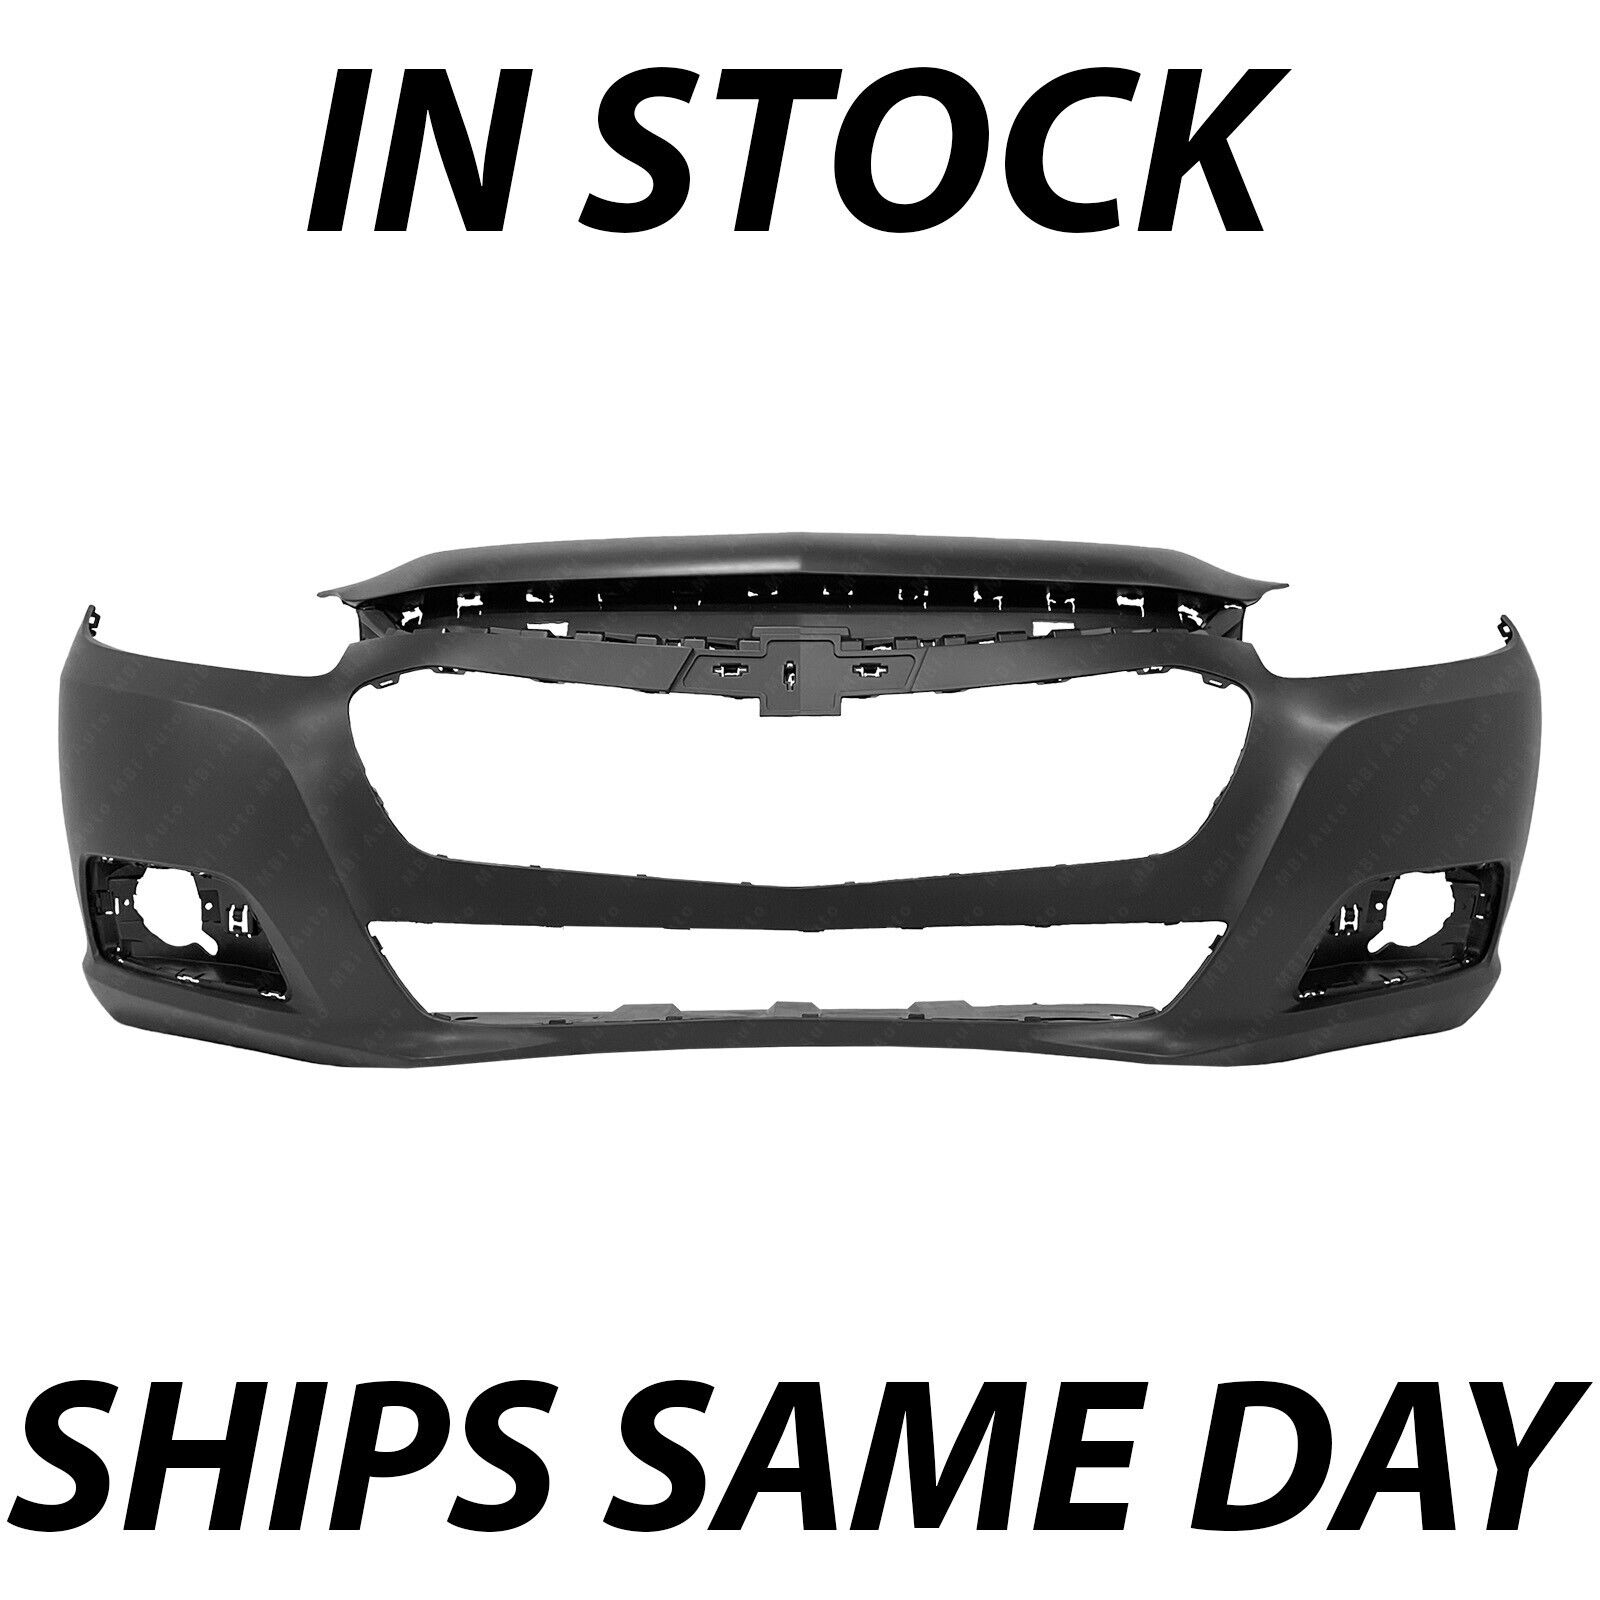 NEW Primered Front Bumper Fascia Replacemnt for 2014 2015 Chevy Chevrolet Malibu